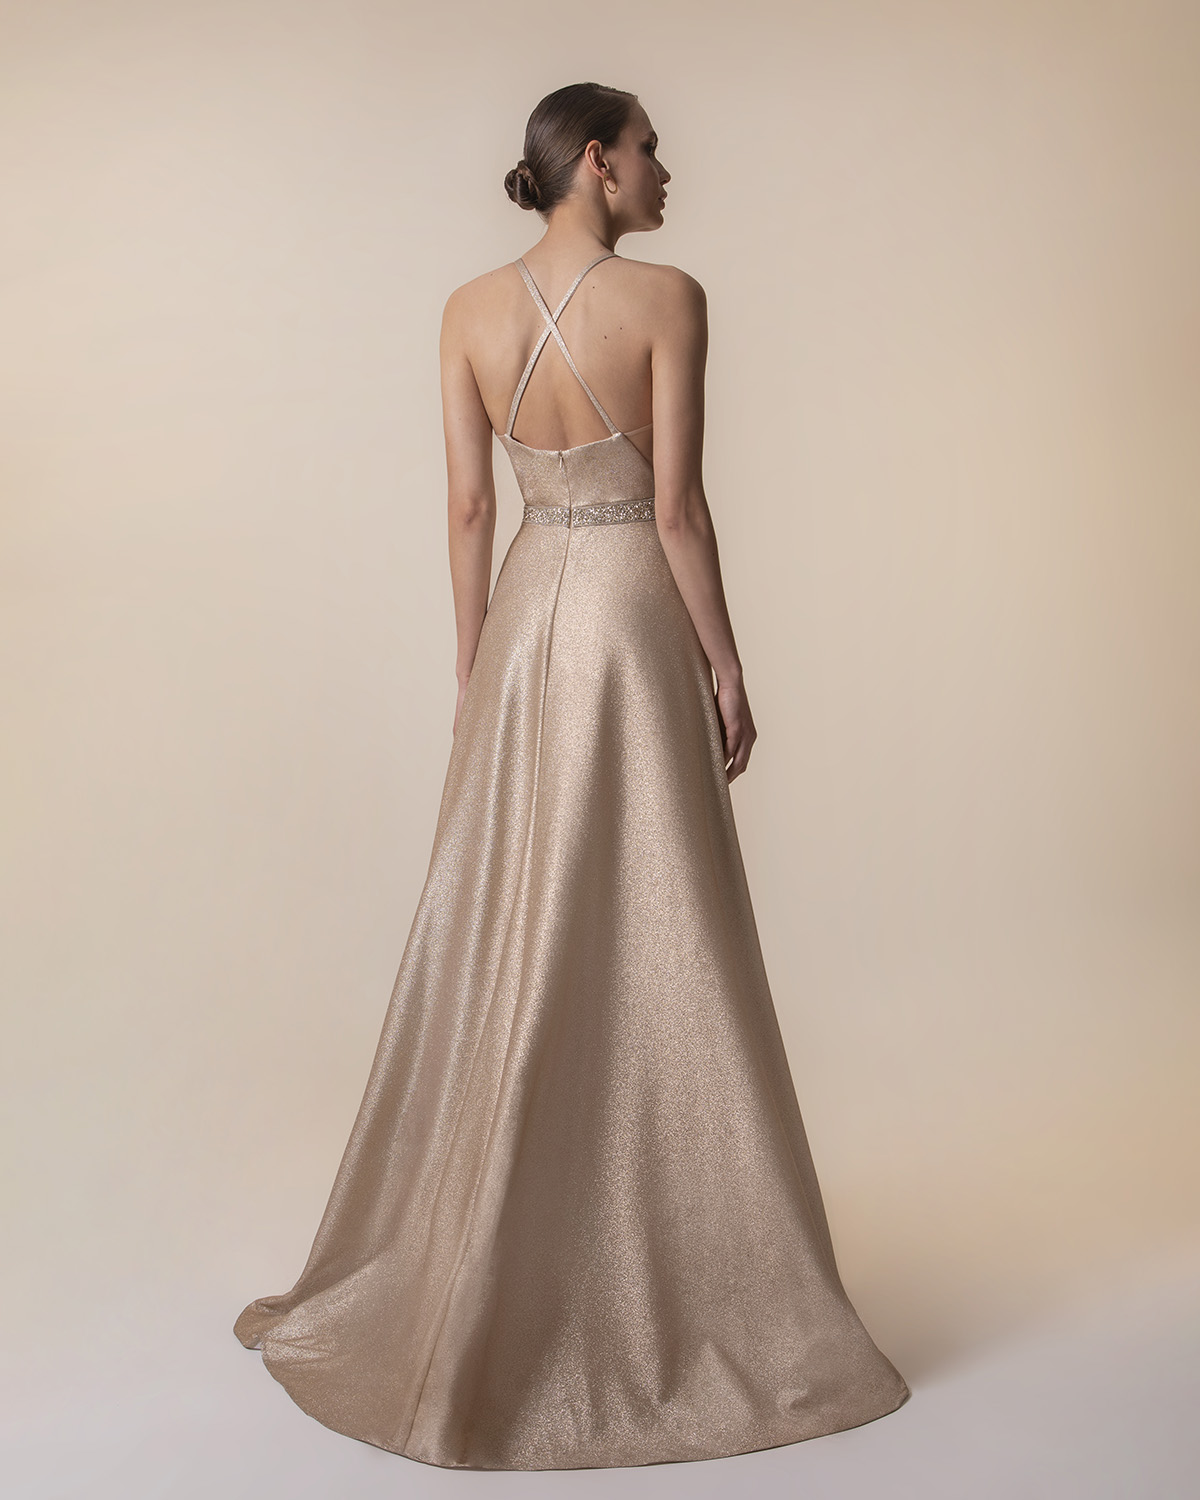 Evening Dresses / Long evening dress with shining fabric and beading around the waist